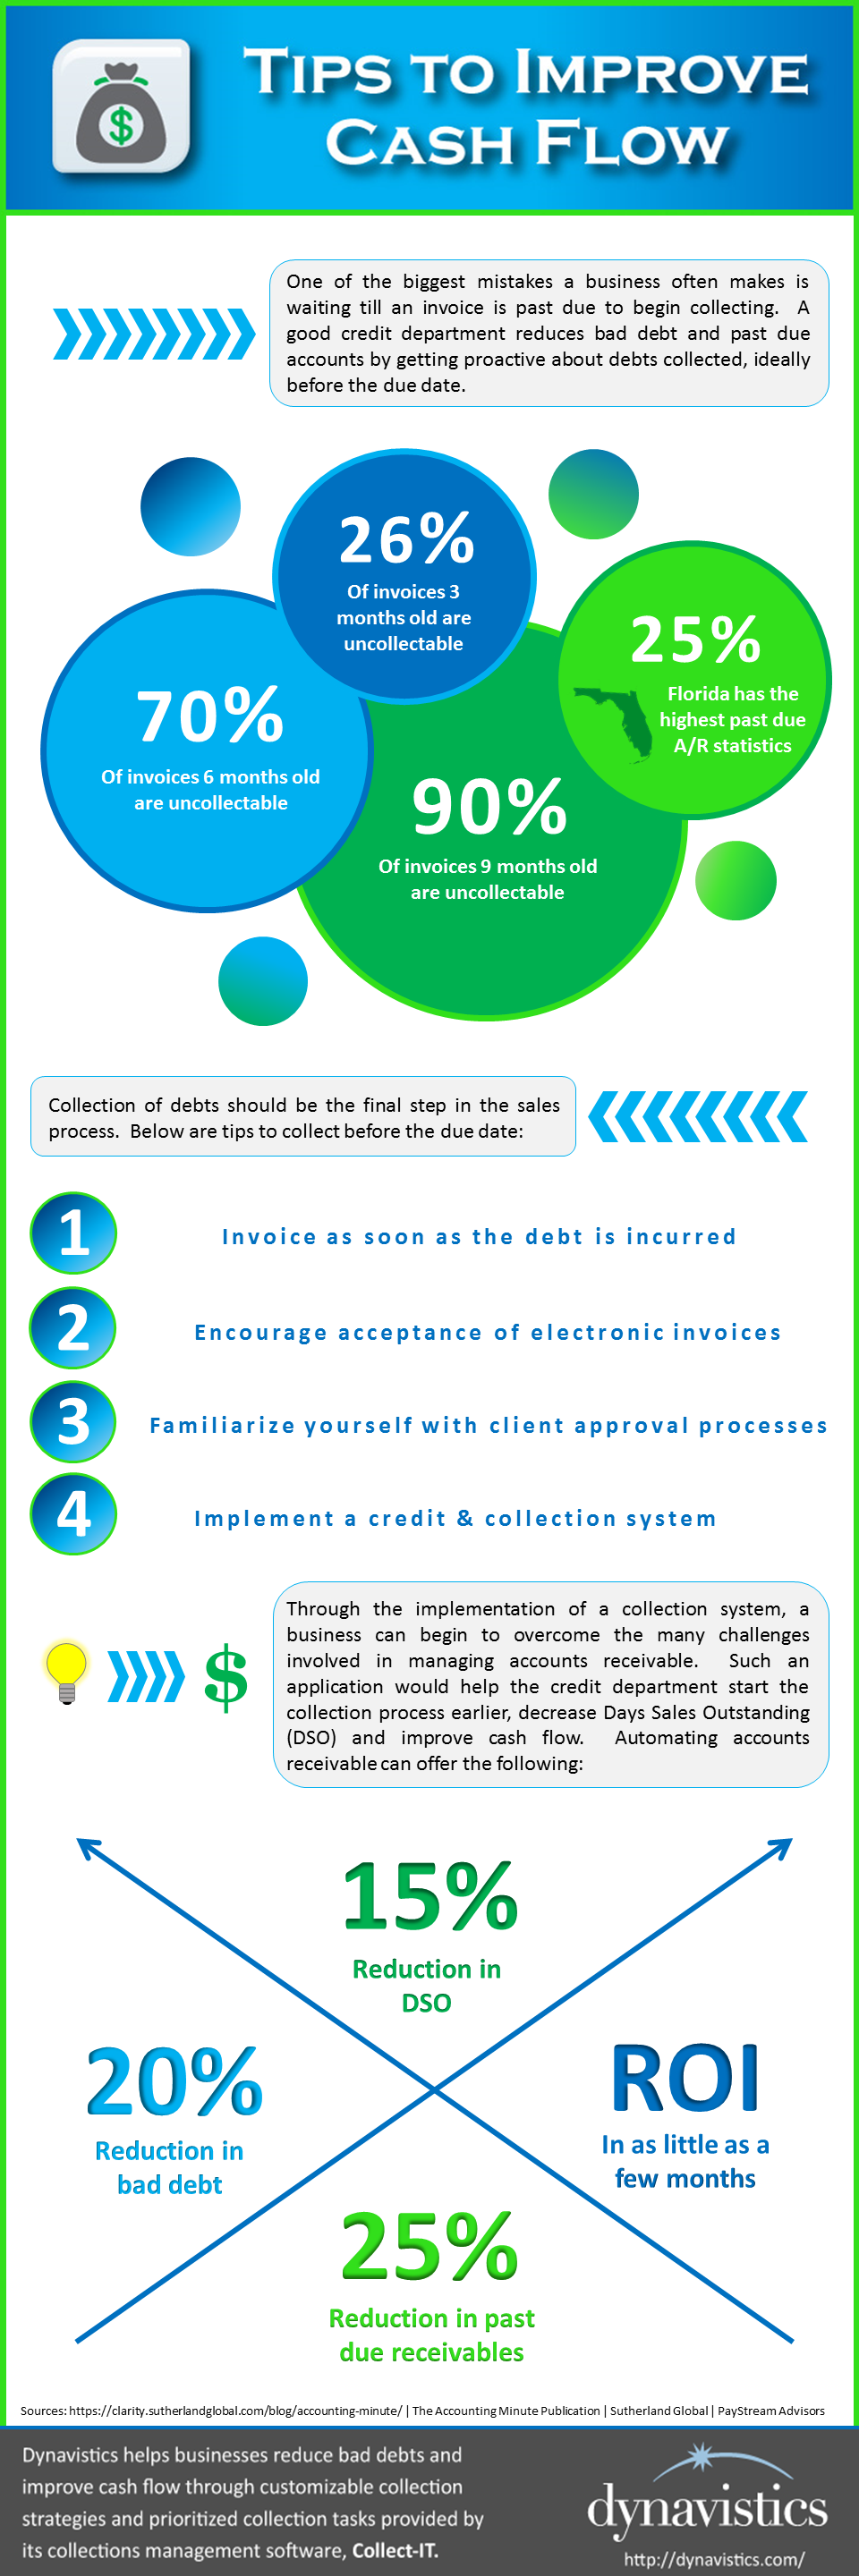 Tips to Improve Cash Flow_Infographic